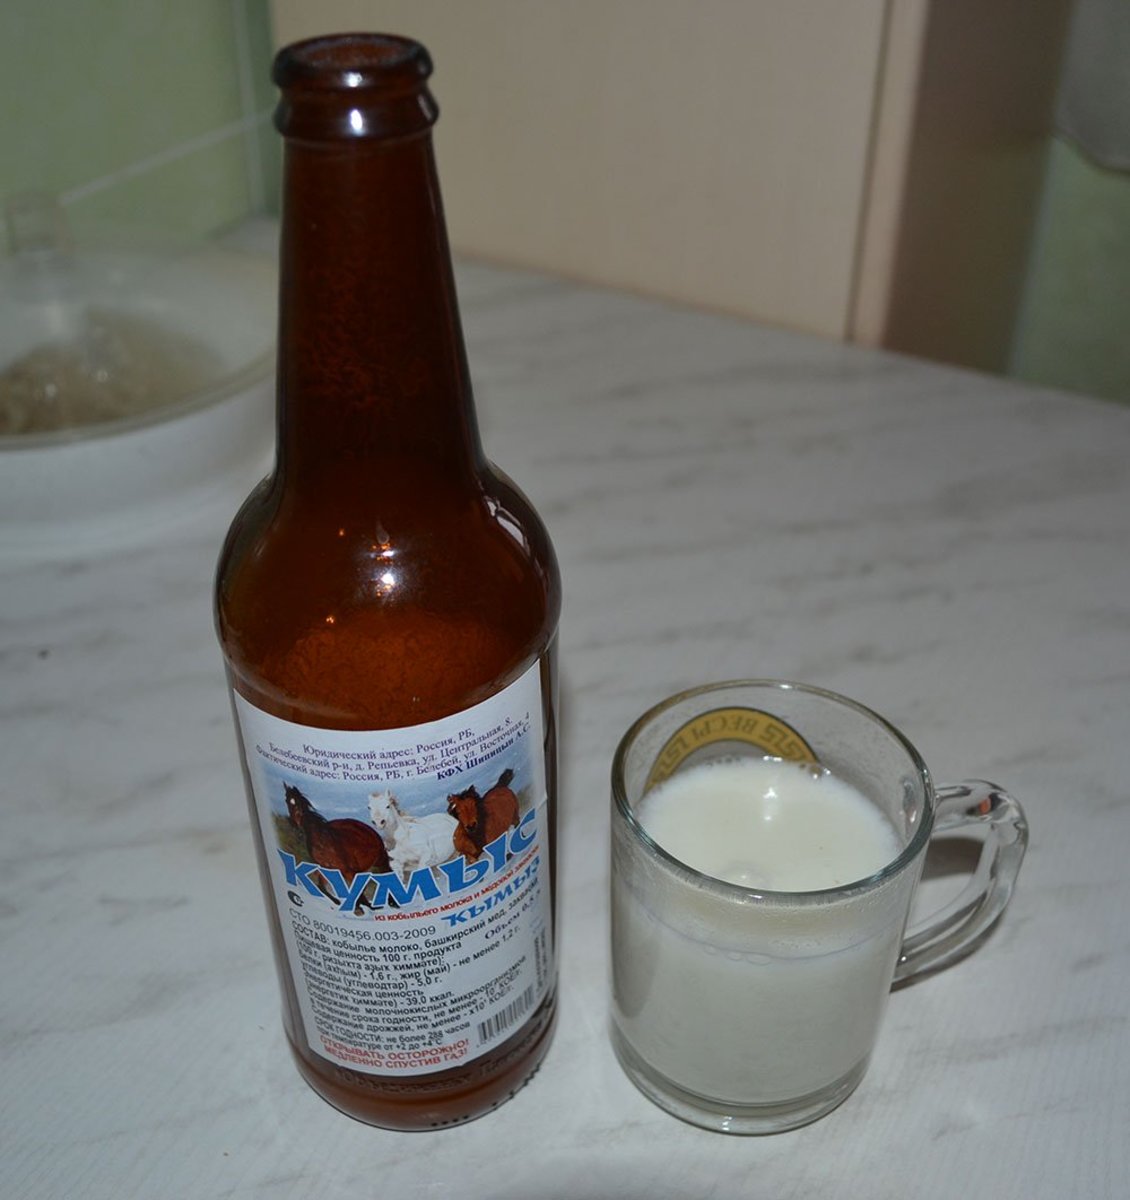 Here is a fresh bottle of kumis—fermented horse's milk—I just drank this before lunch!